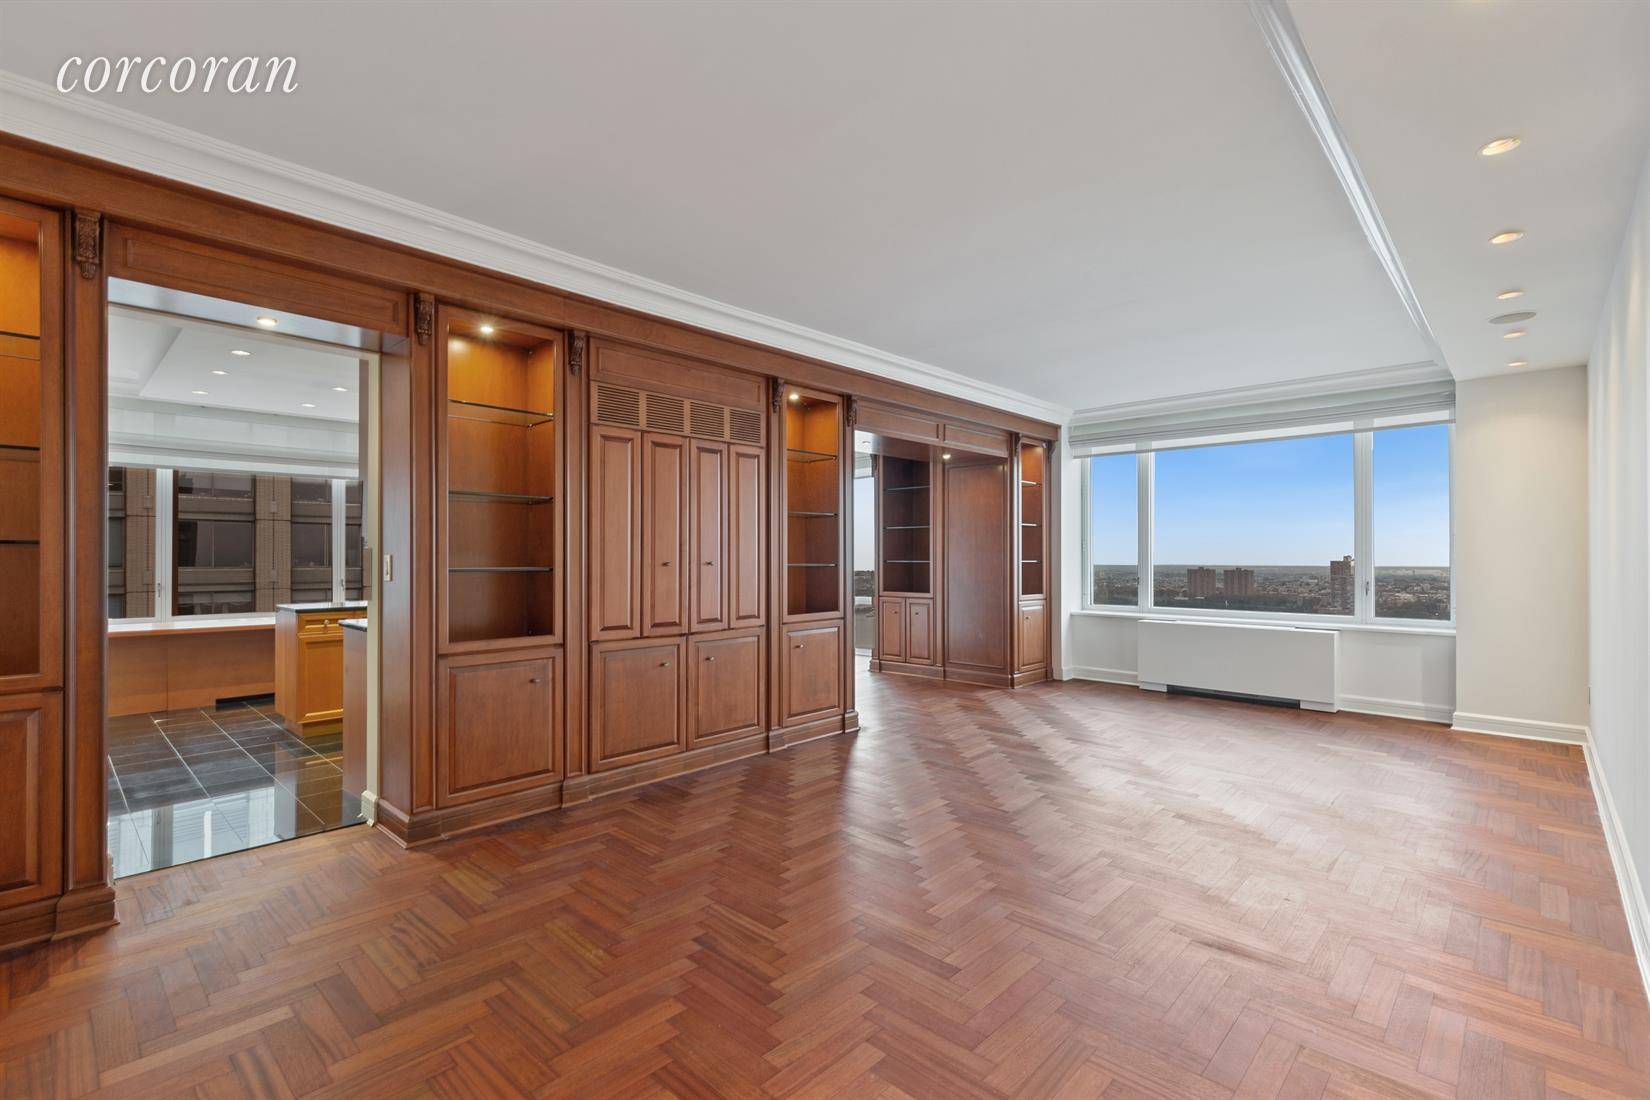 No fees ! Also, Landlord pays application fees ; 220 RSB Luxury 1915 SF, 3BR 3BTH 45th floor, mint corner unit with spectacular Jaw Dropping Hudson River Views ; Washer ...